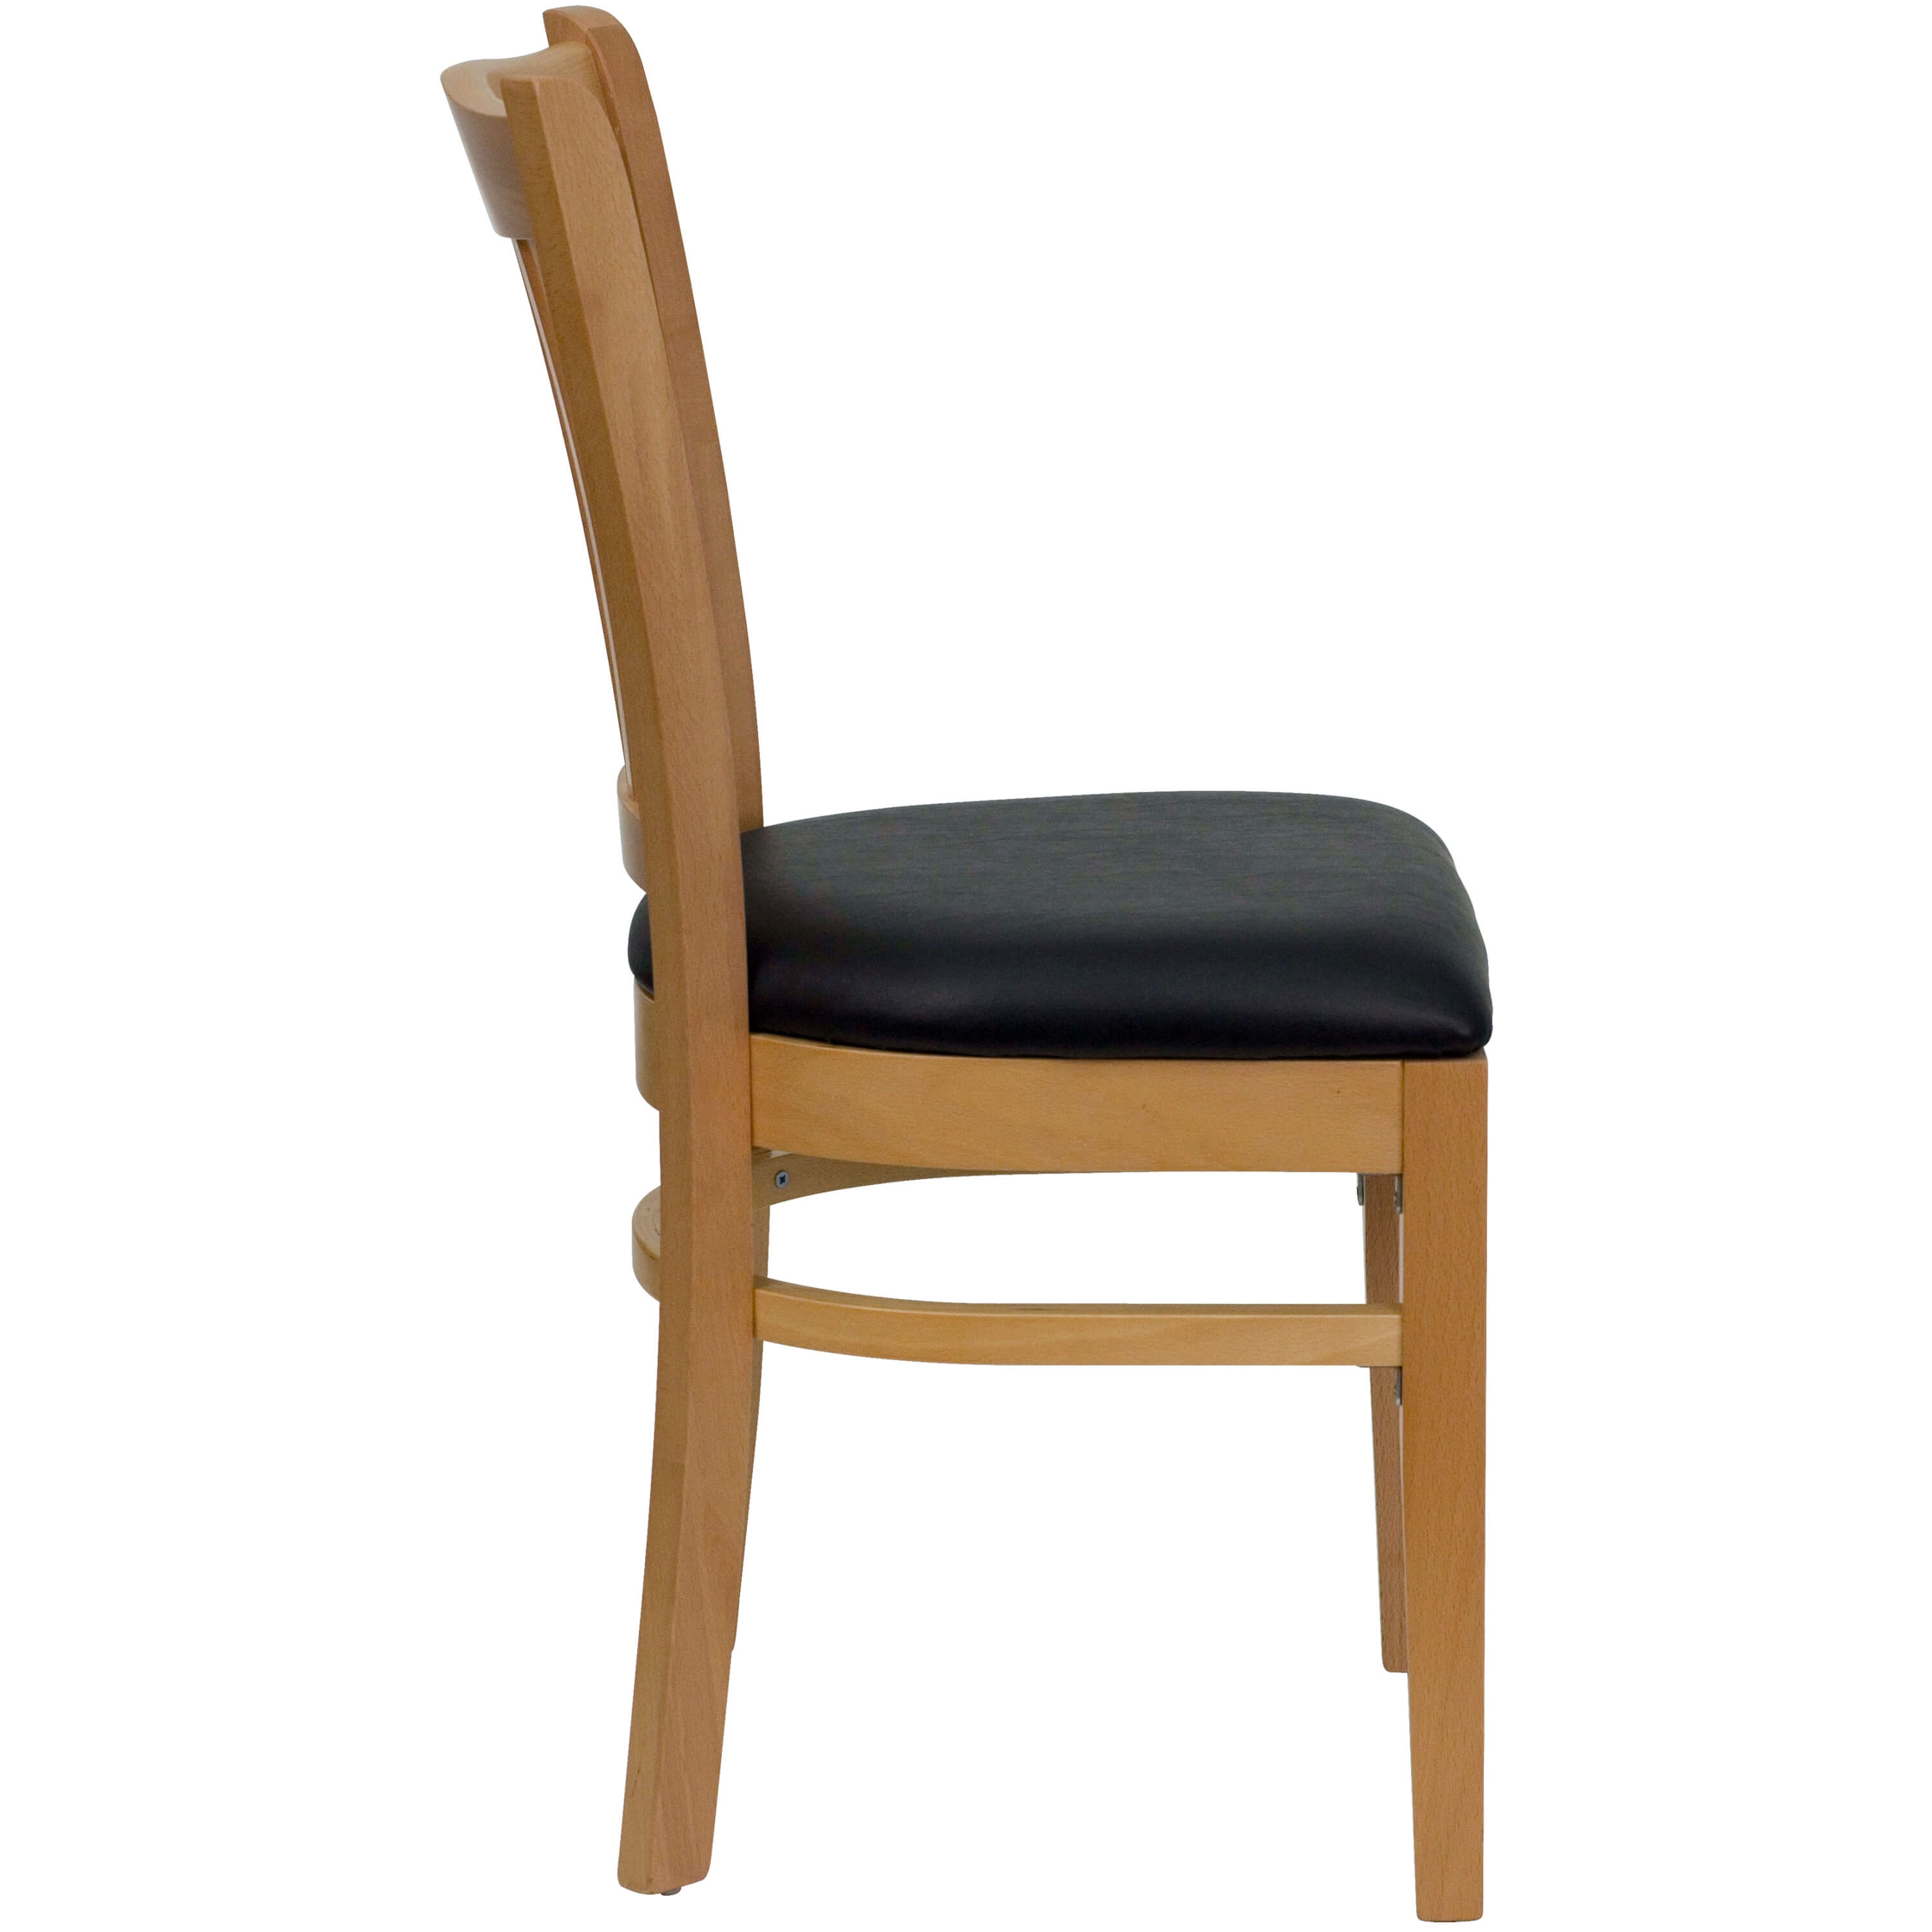 Vertical slat back chair side view